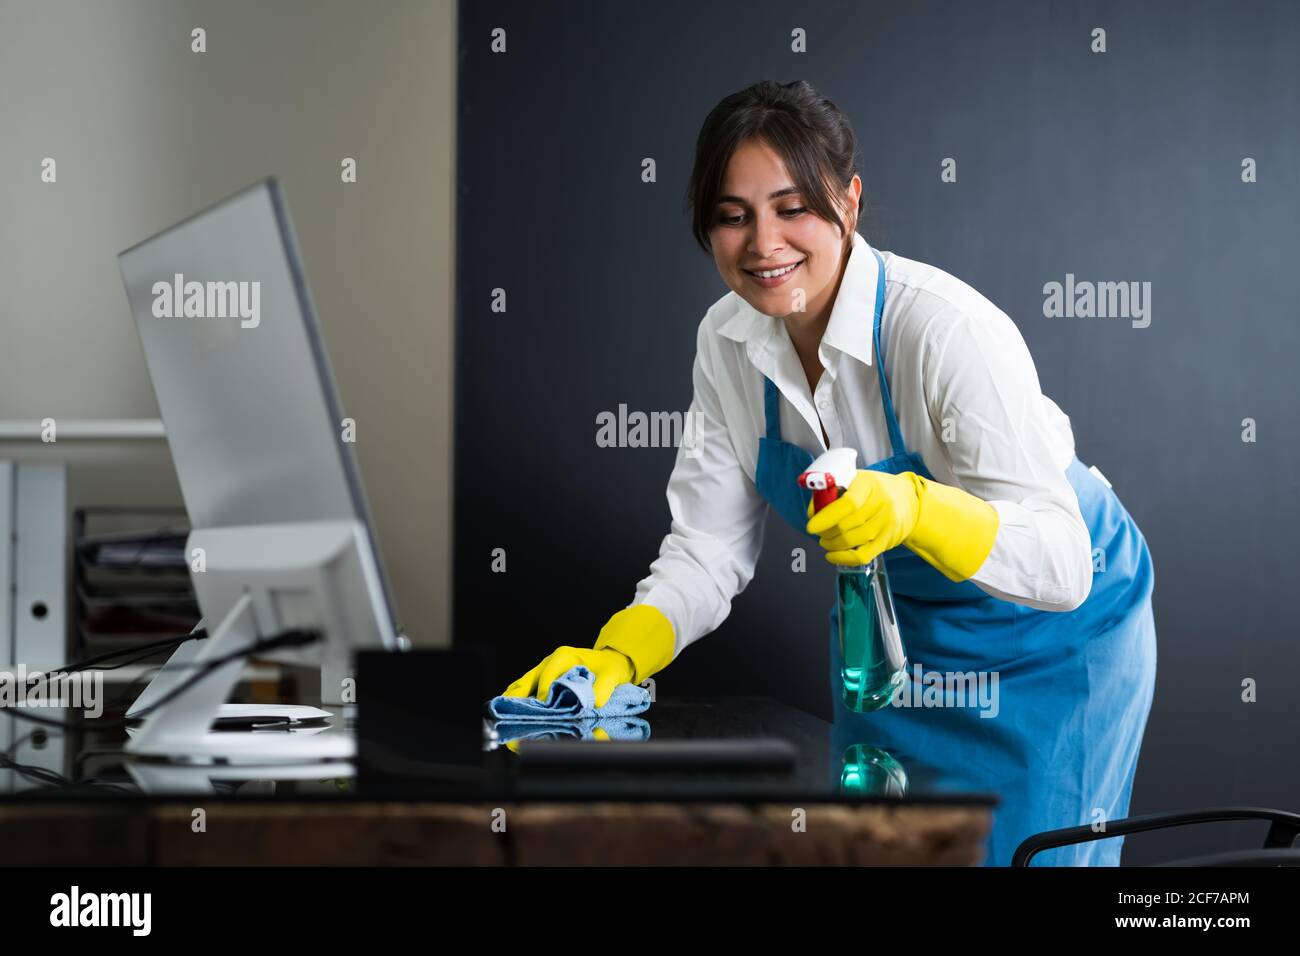 Janitor Cleaning Office Desk. Hygiene Cleaner Service Stock Photo